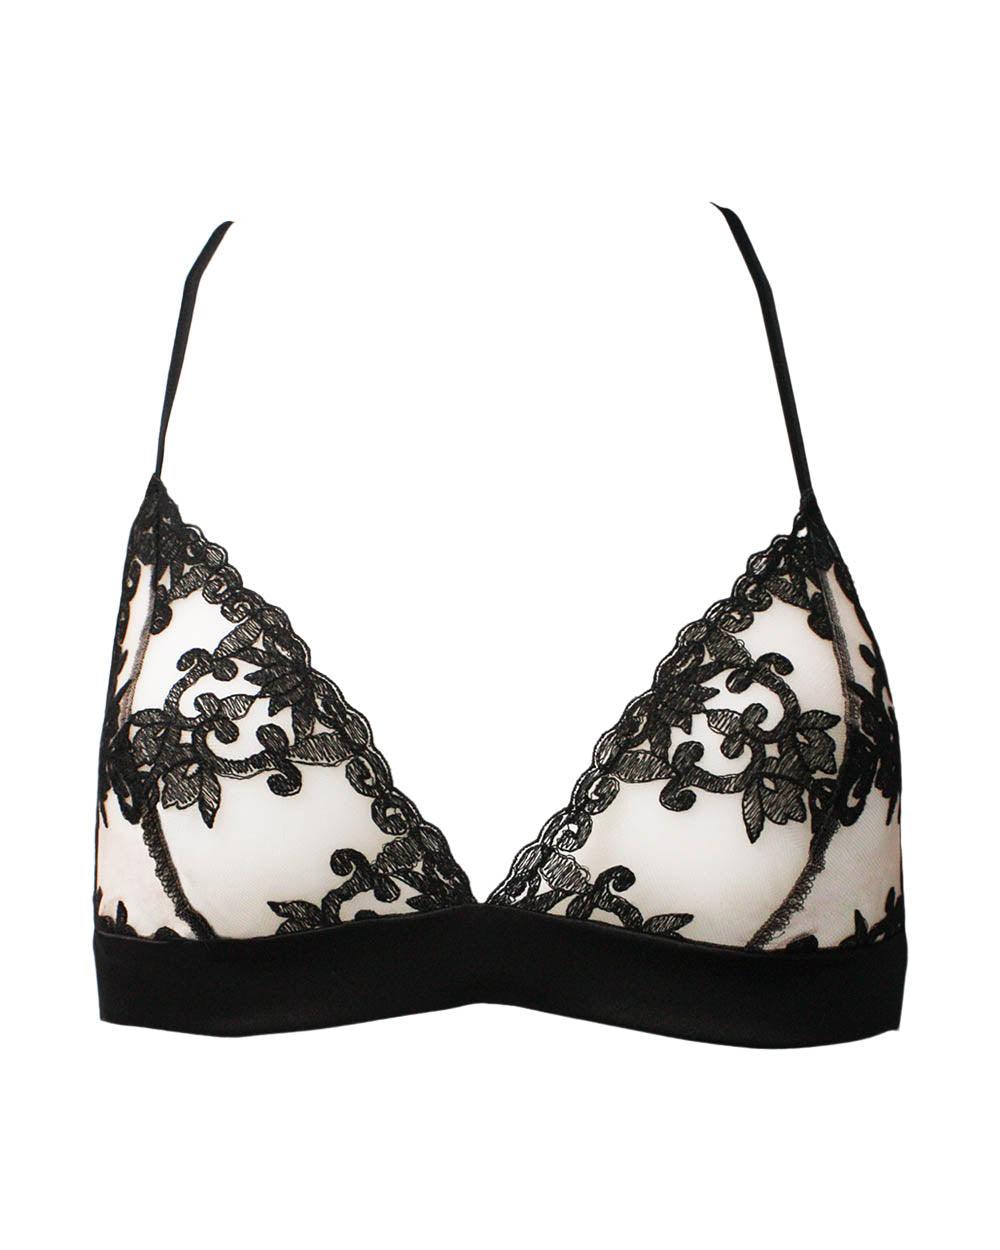 Bandeau Bra in Onyx with embroidered tulle